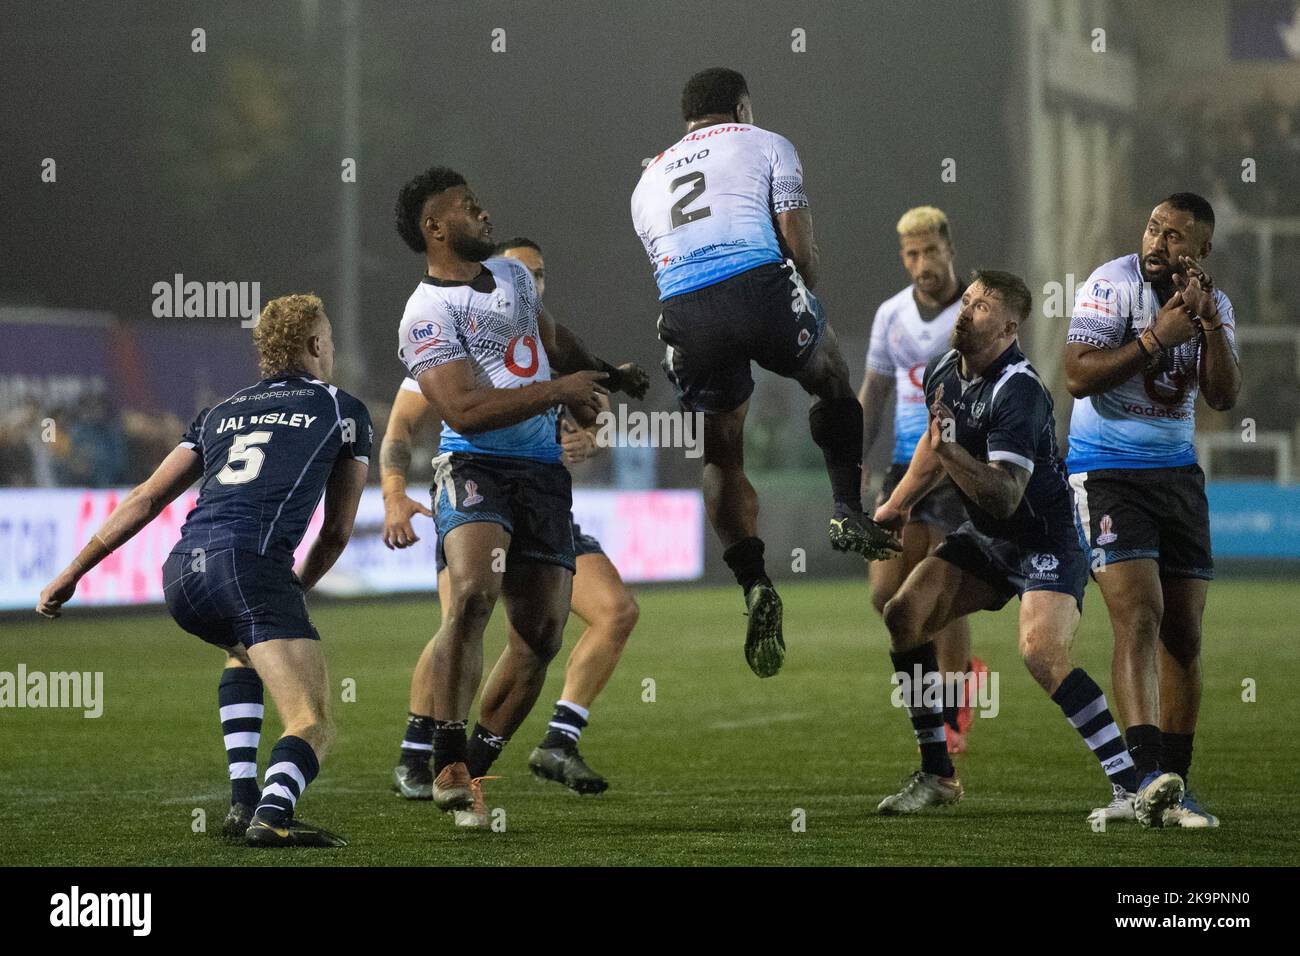 Fiji Winger Maika Sivo catches the ball during The 2021 Rugby League World Cup Pool B match between Fiji and Scotland at Kingston Park, Newcastle on Saturday 29th October 2022